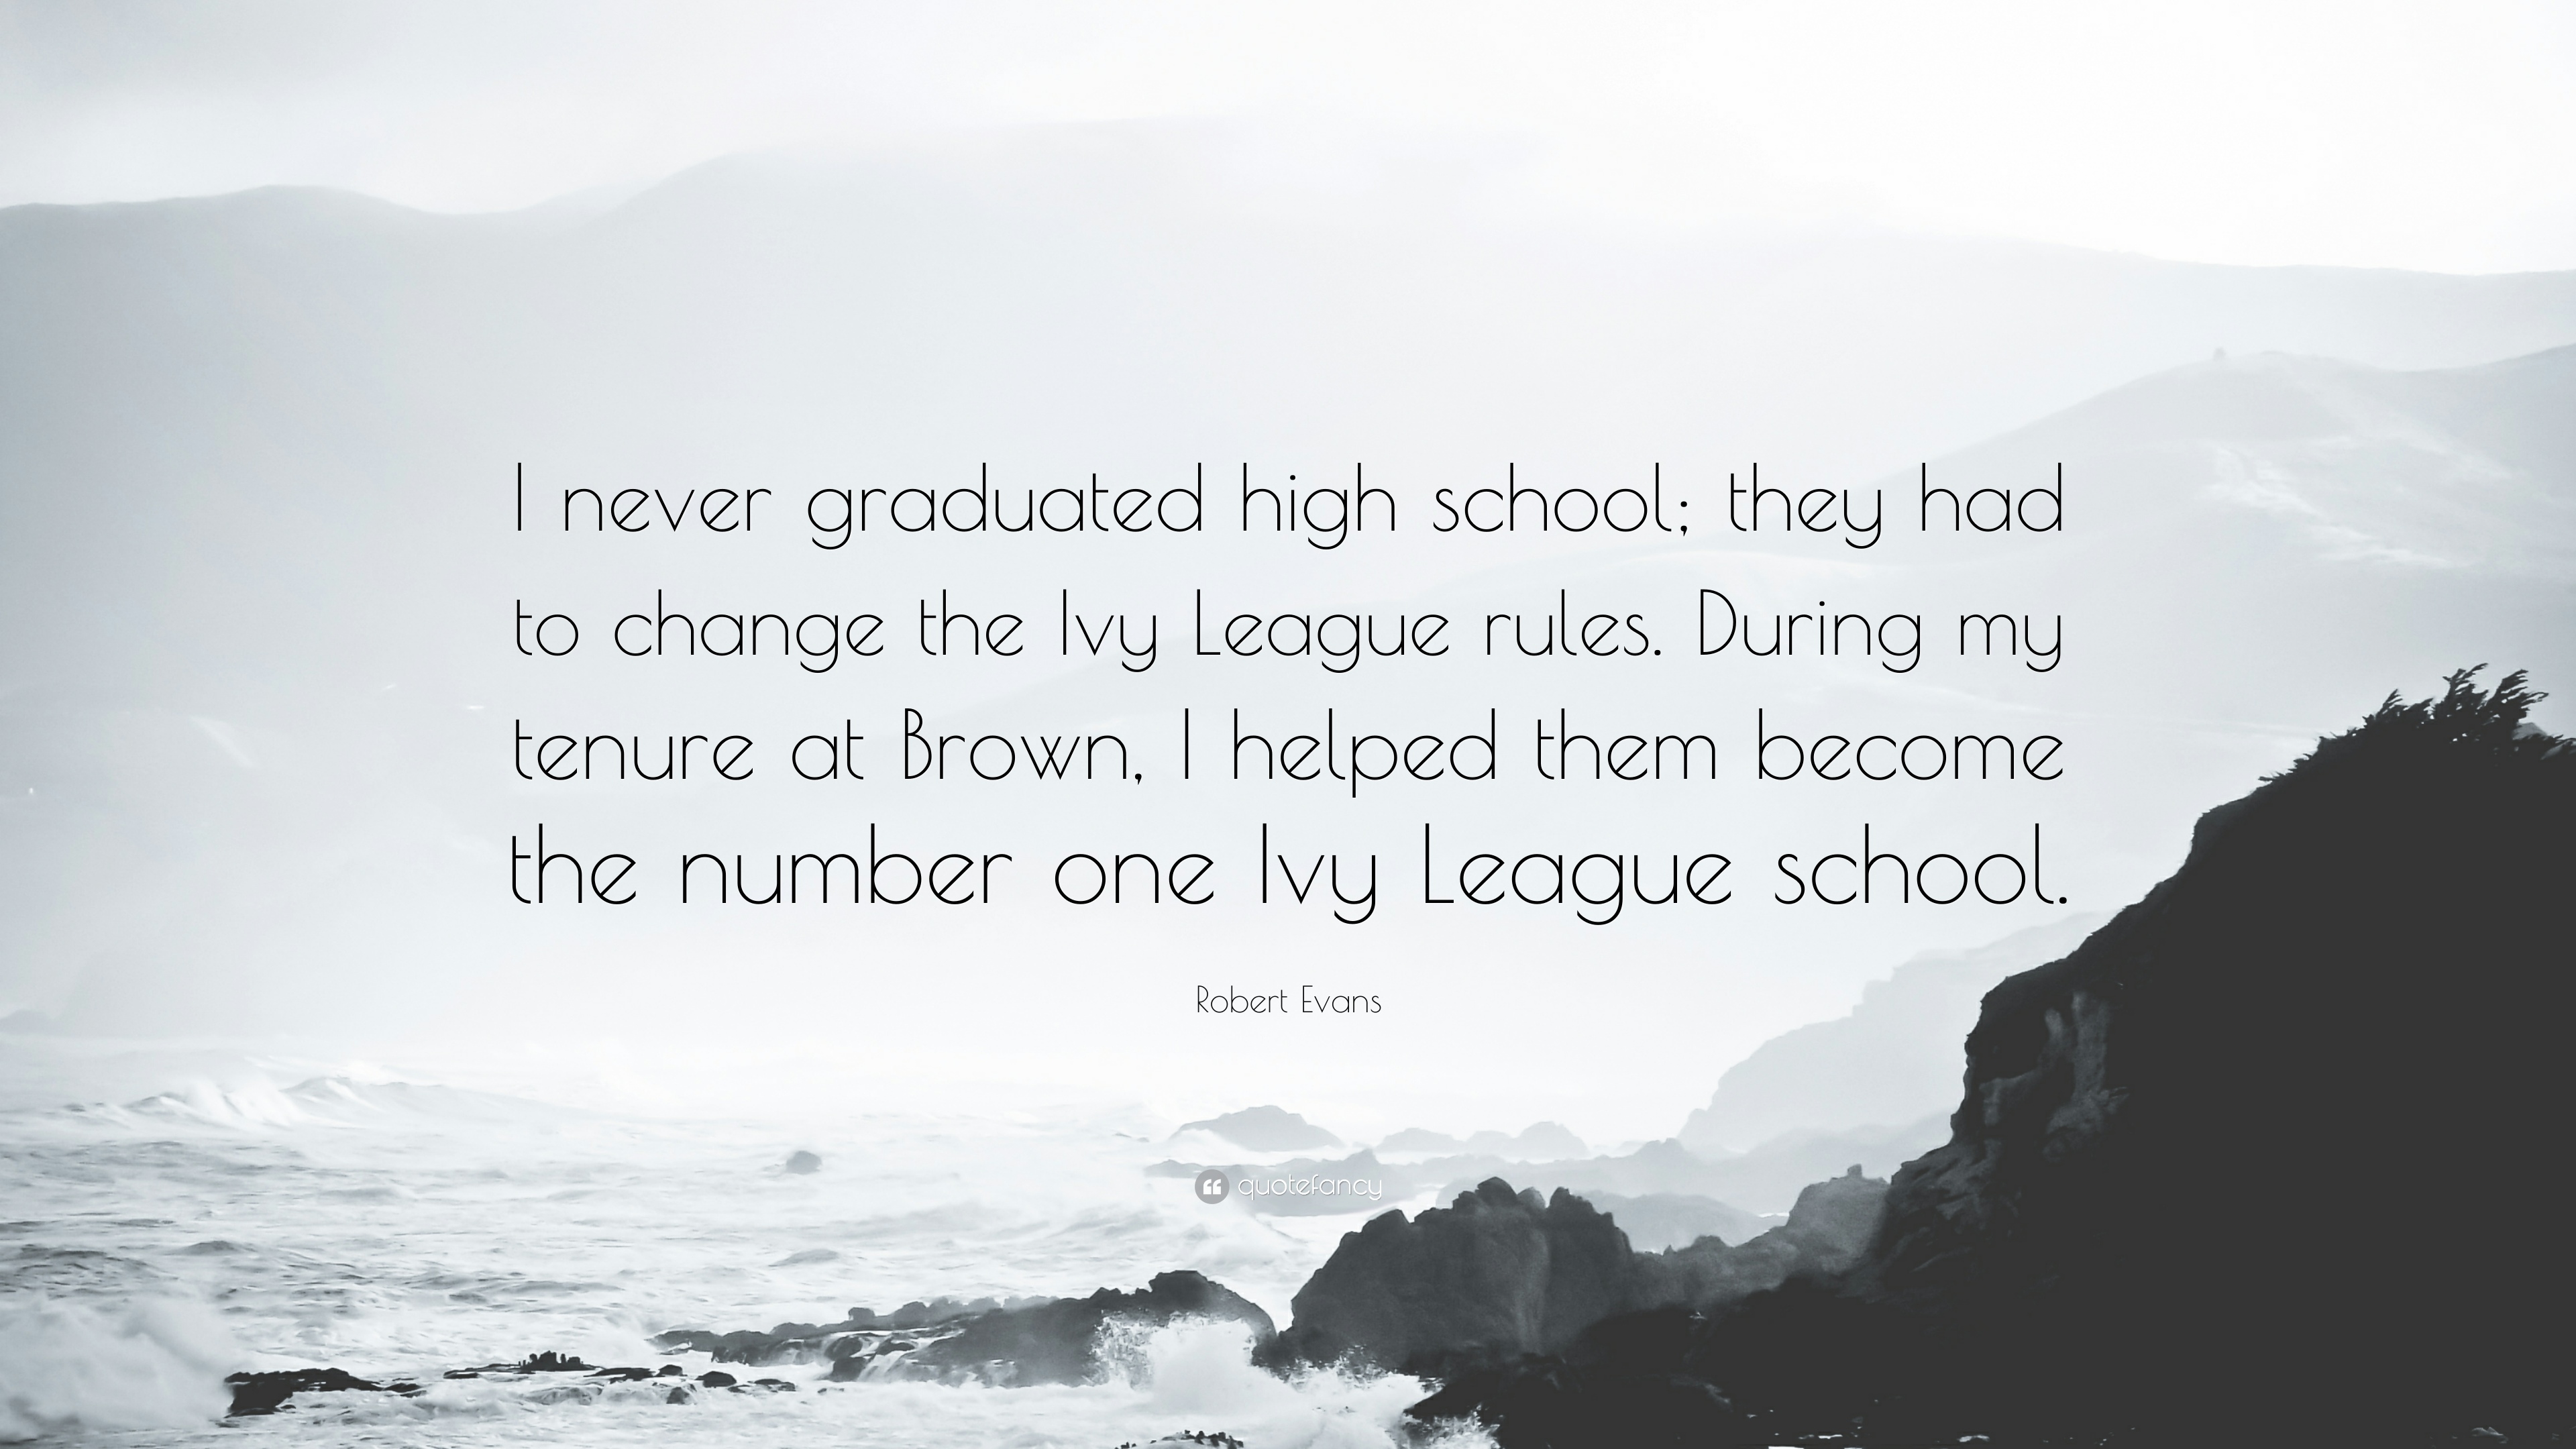 Robert Evans Quote: “I never graduated high school; they had to